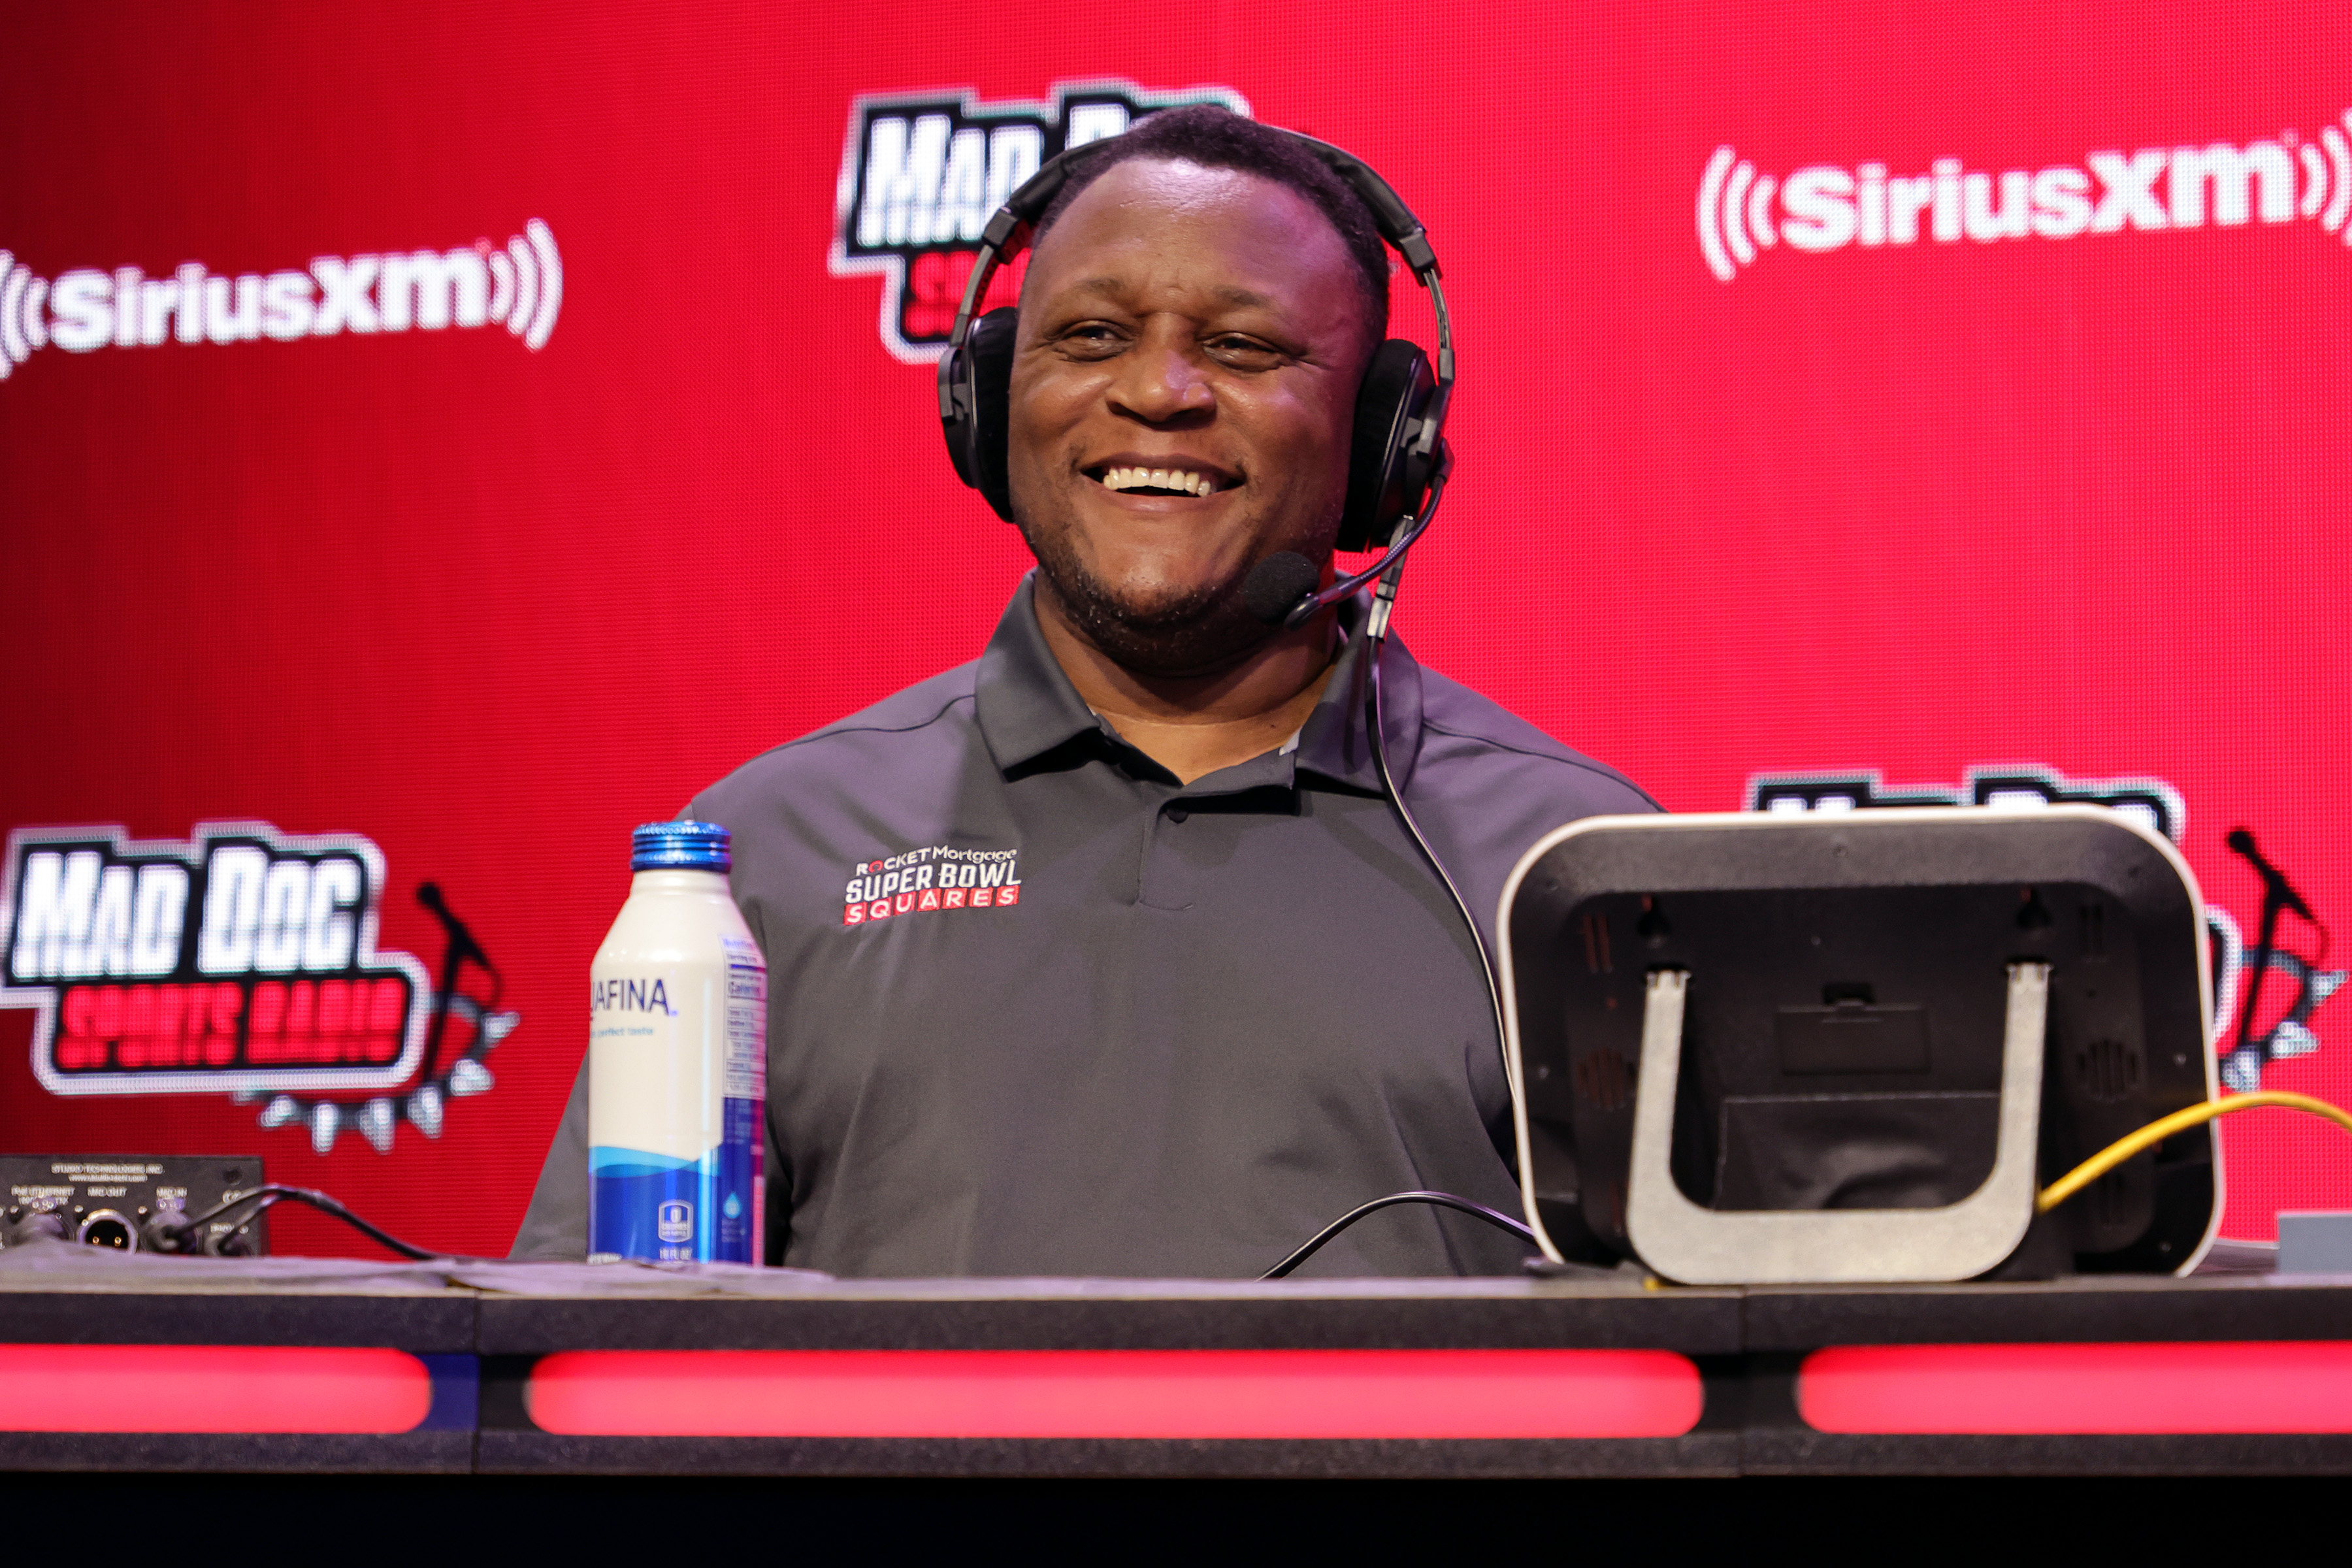 Legendary running back Barry Sanders of the Detroit Lions speaks during an interview on day 2 of SiriusXM at Super Bowl LVI in Los Angeles, California, February 10, 2022. /CFP